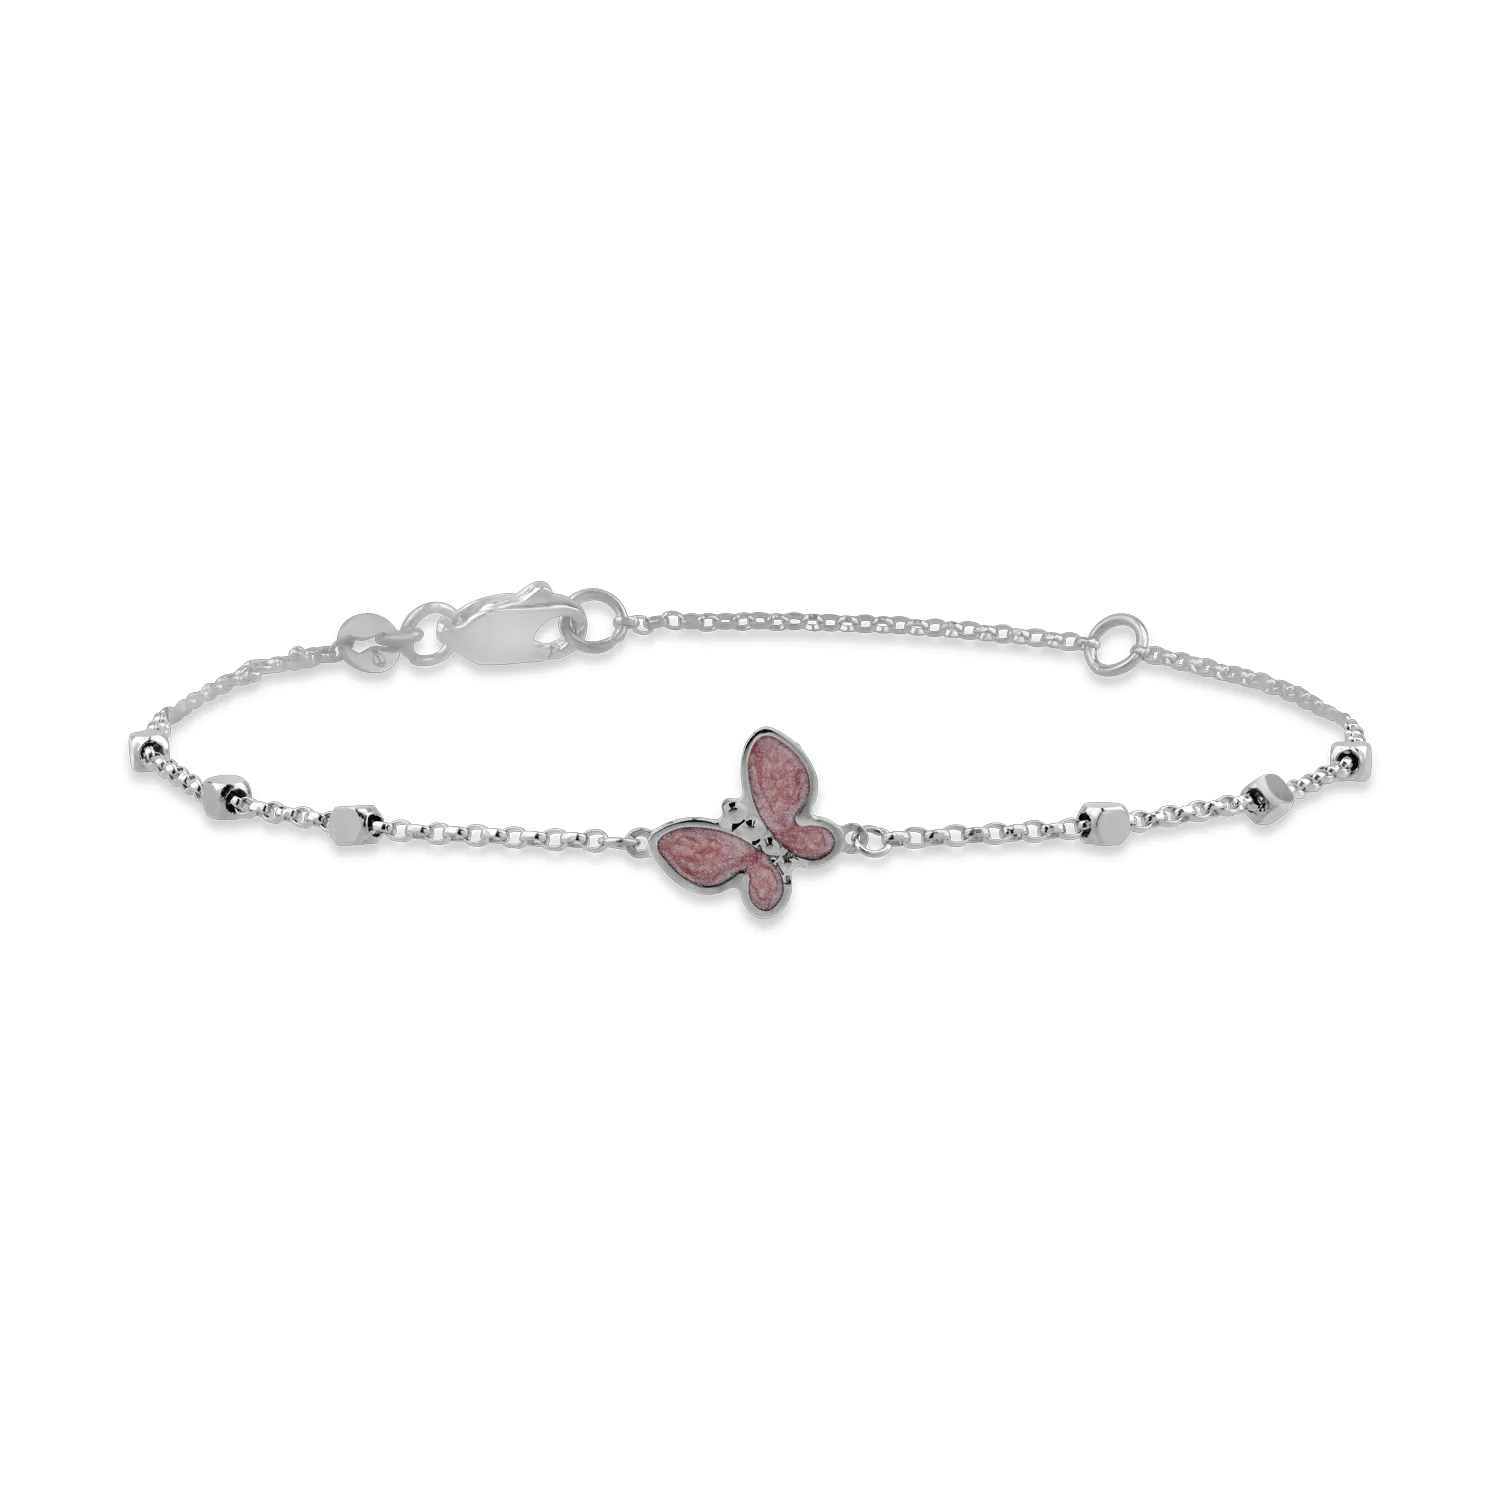 White gold bracelet with beads and butterfly pendant